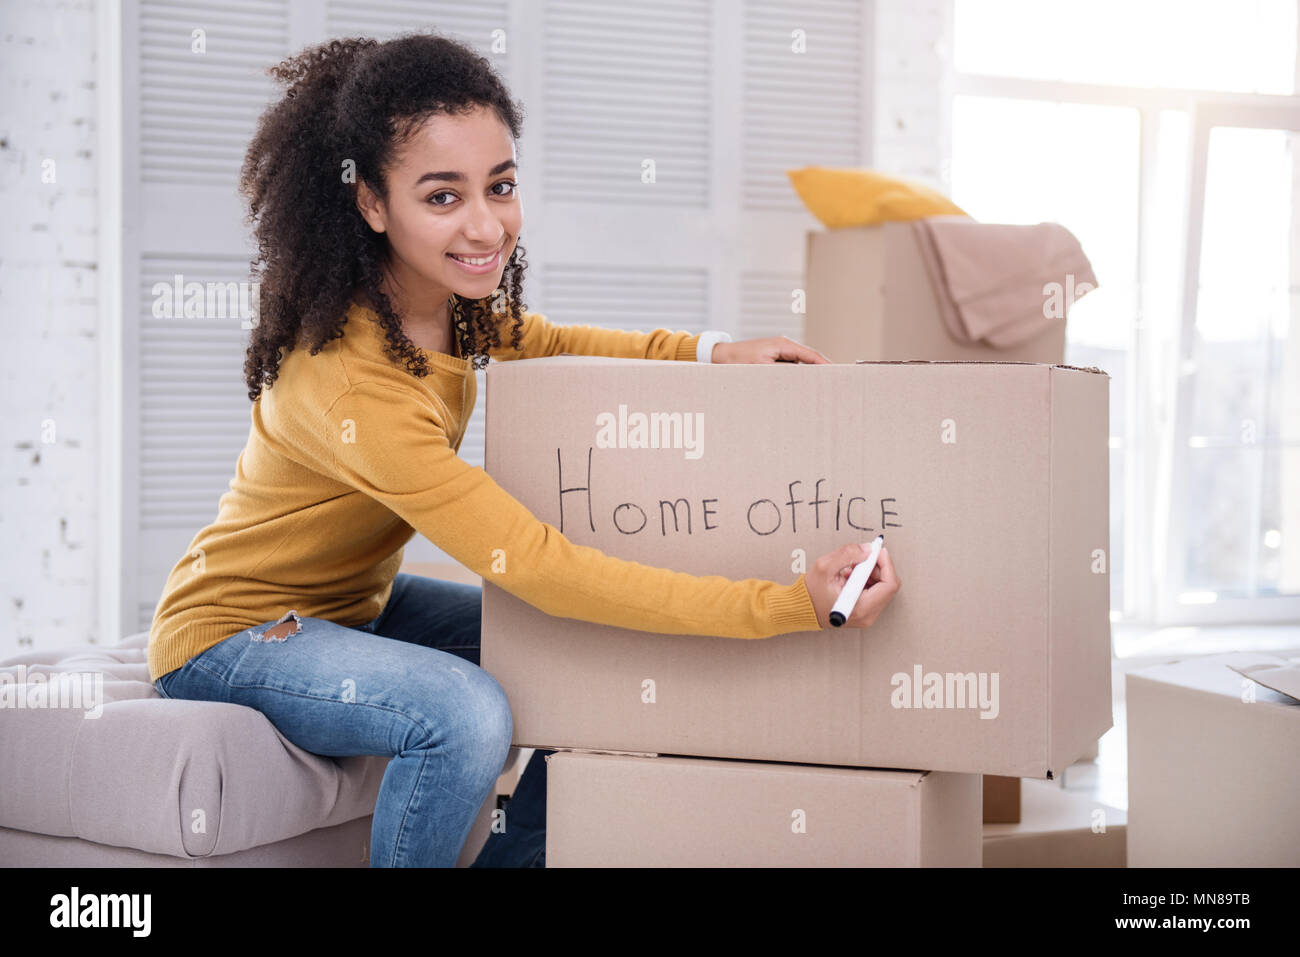 Upbeat girl signing box with belongings for home office Stock Photo